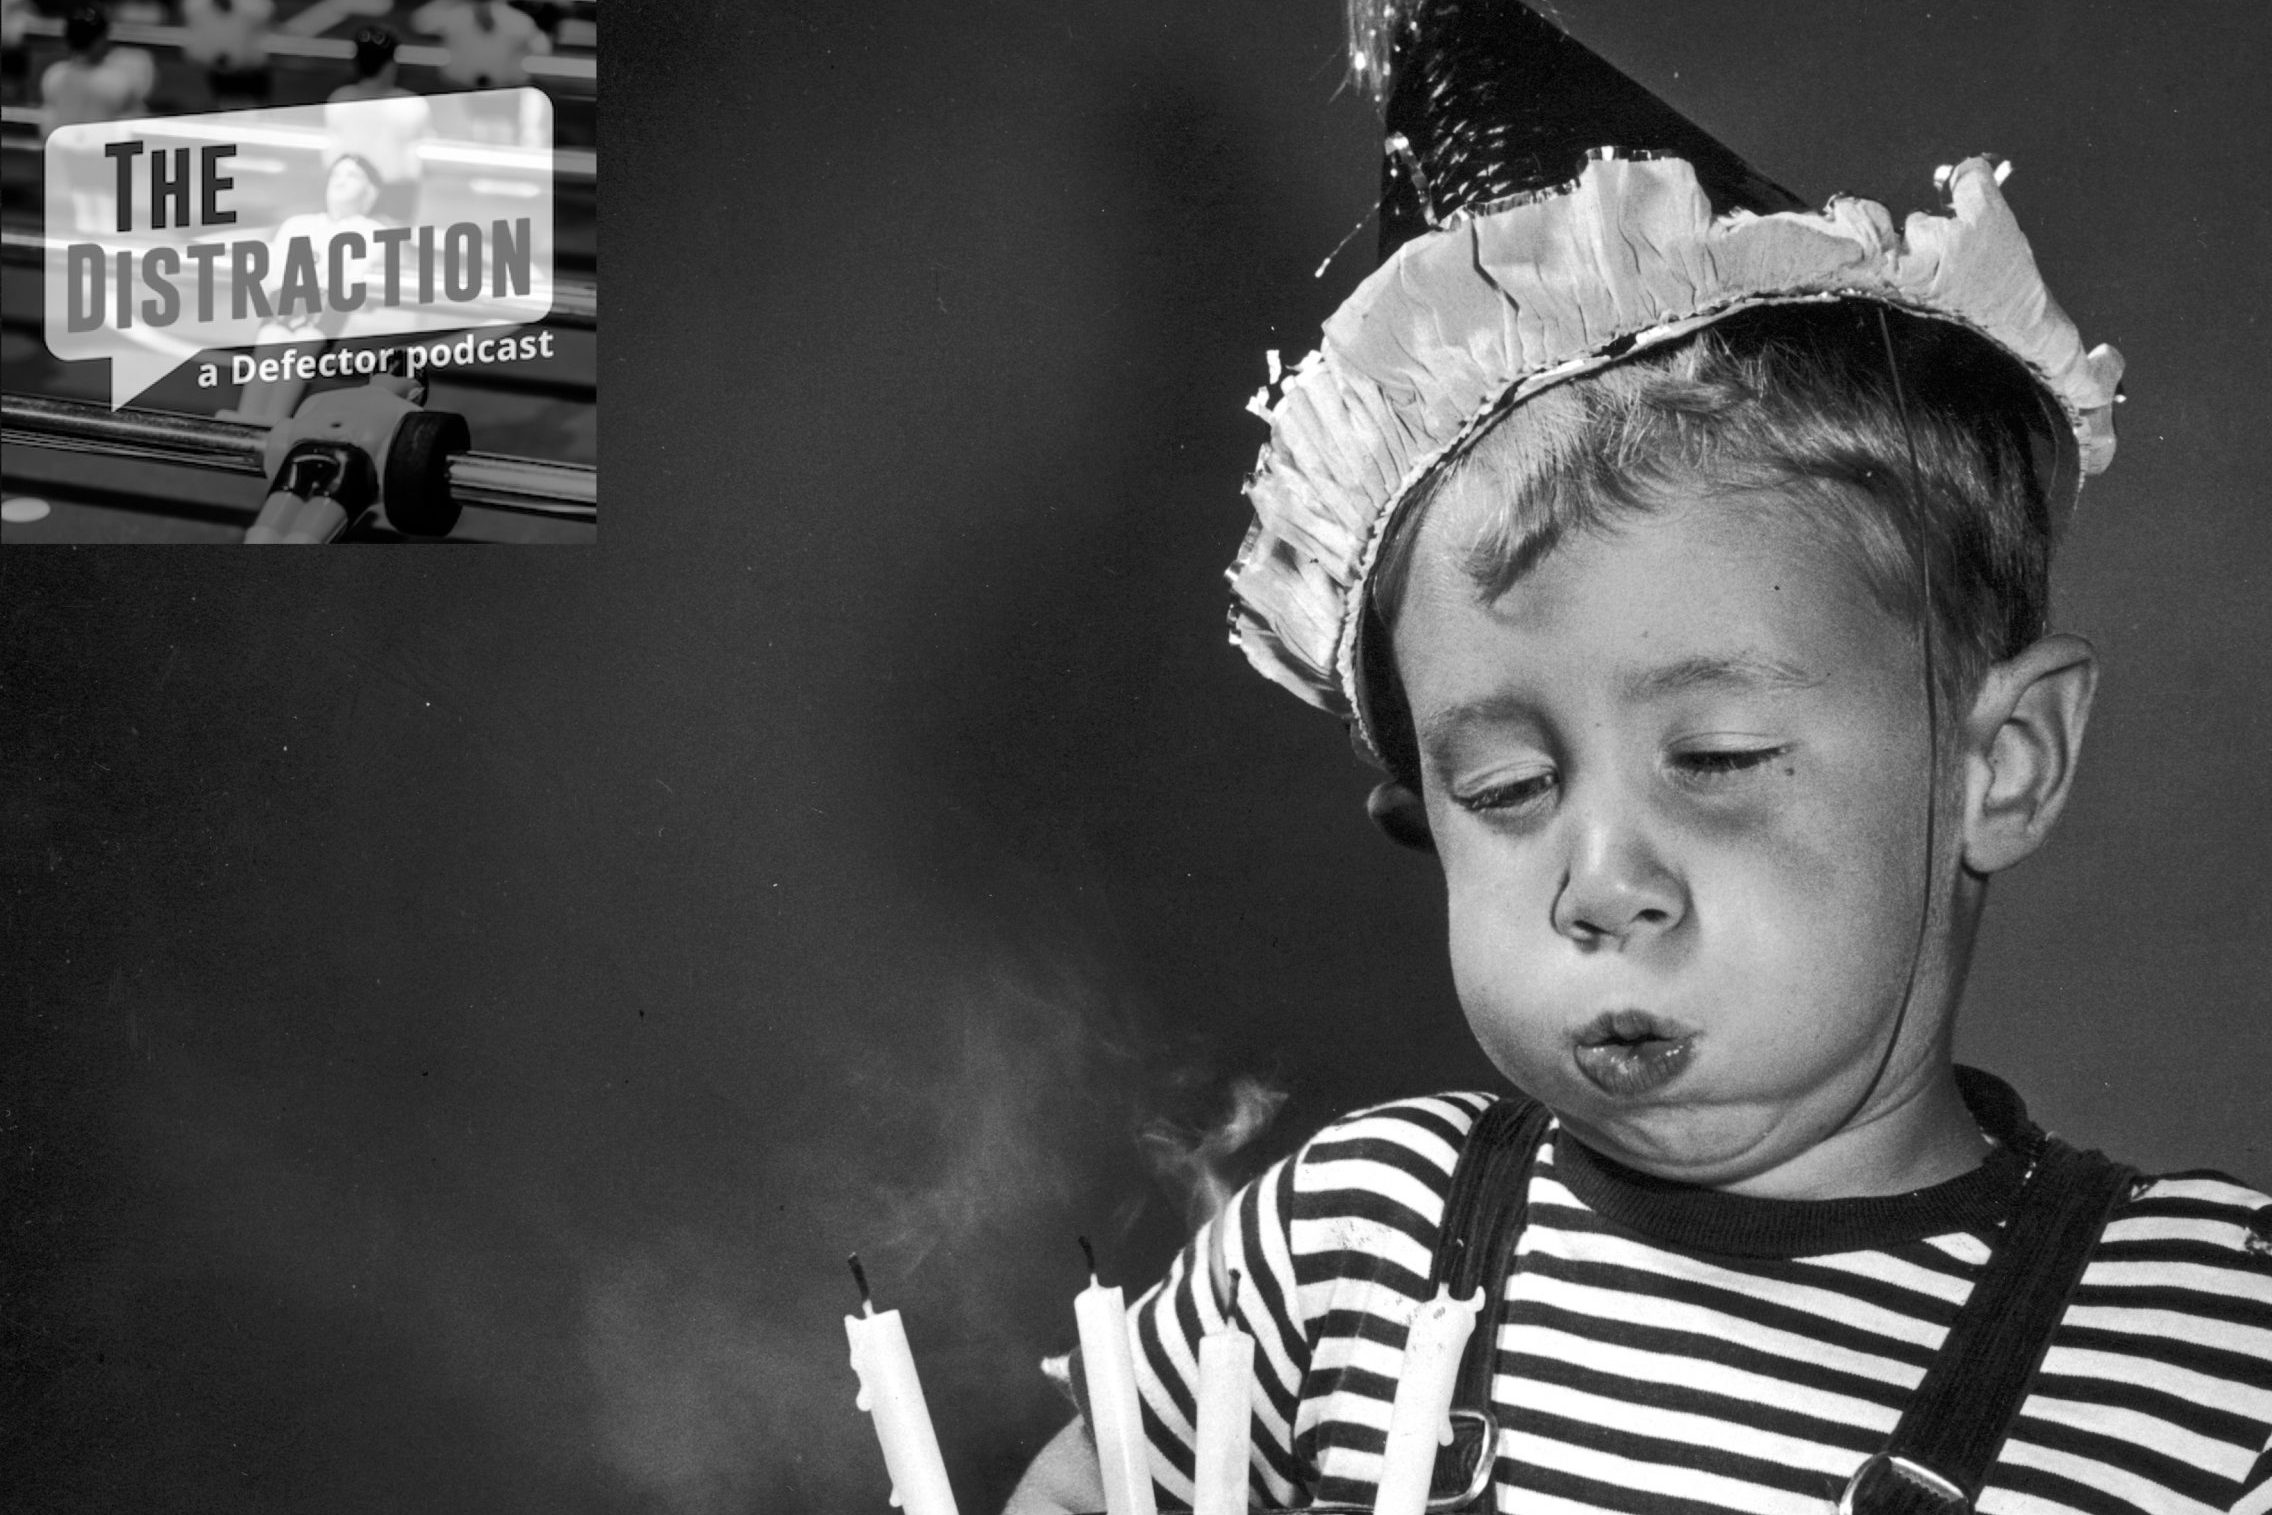 circa 1945: Studio image of a young boy wearing a party hat, blowing out the four candles on a chocolate birthday cake